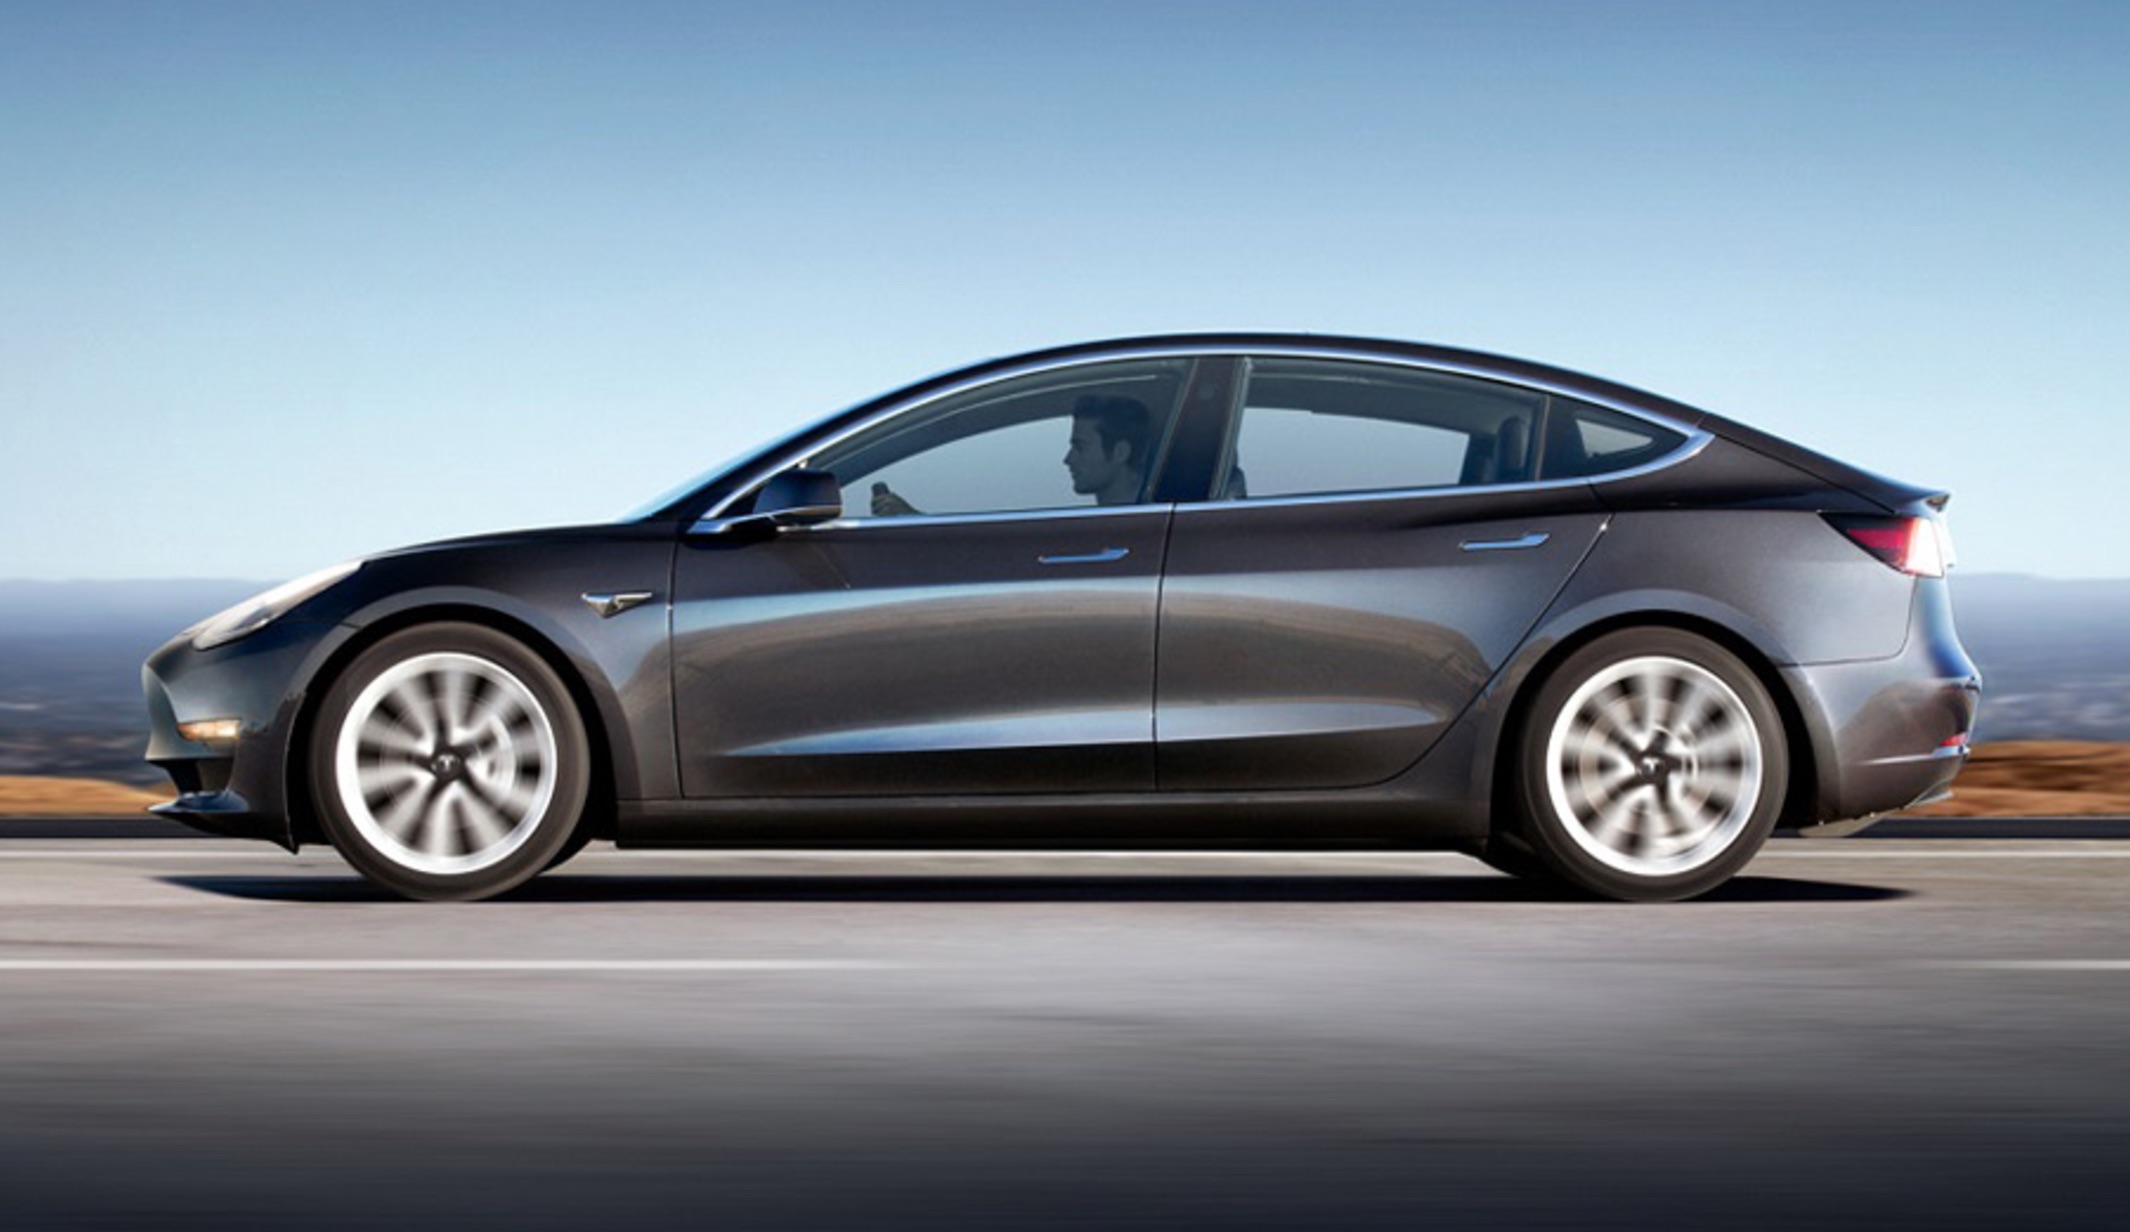 Most Expensive Tesla Model 3 Highland Costs $64,000 - CarsDirect